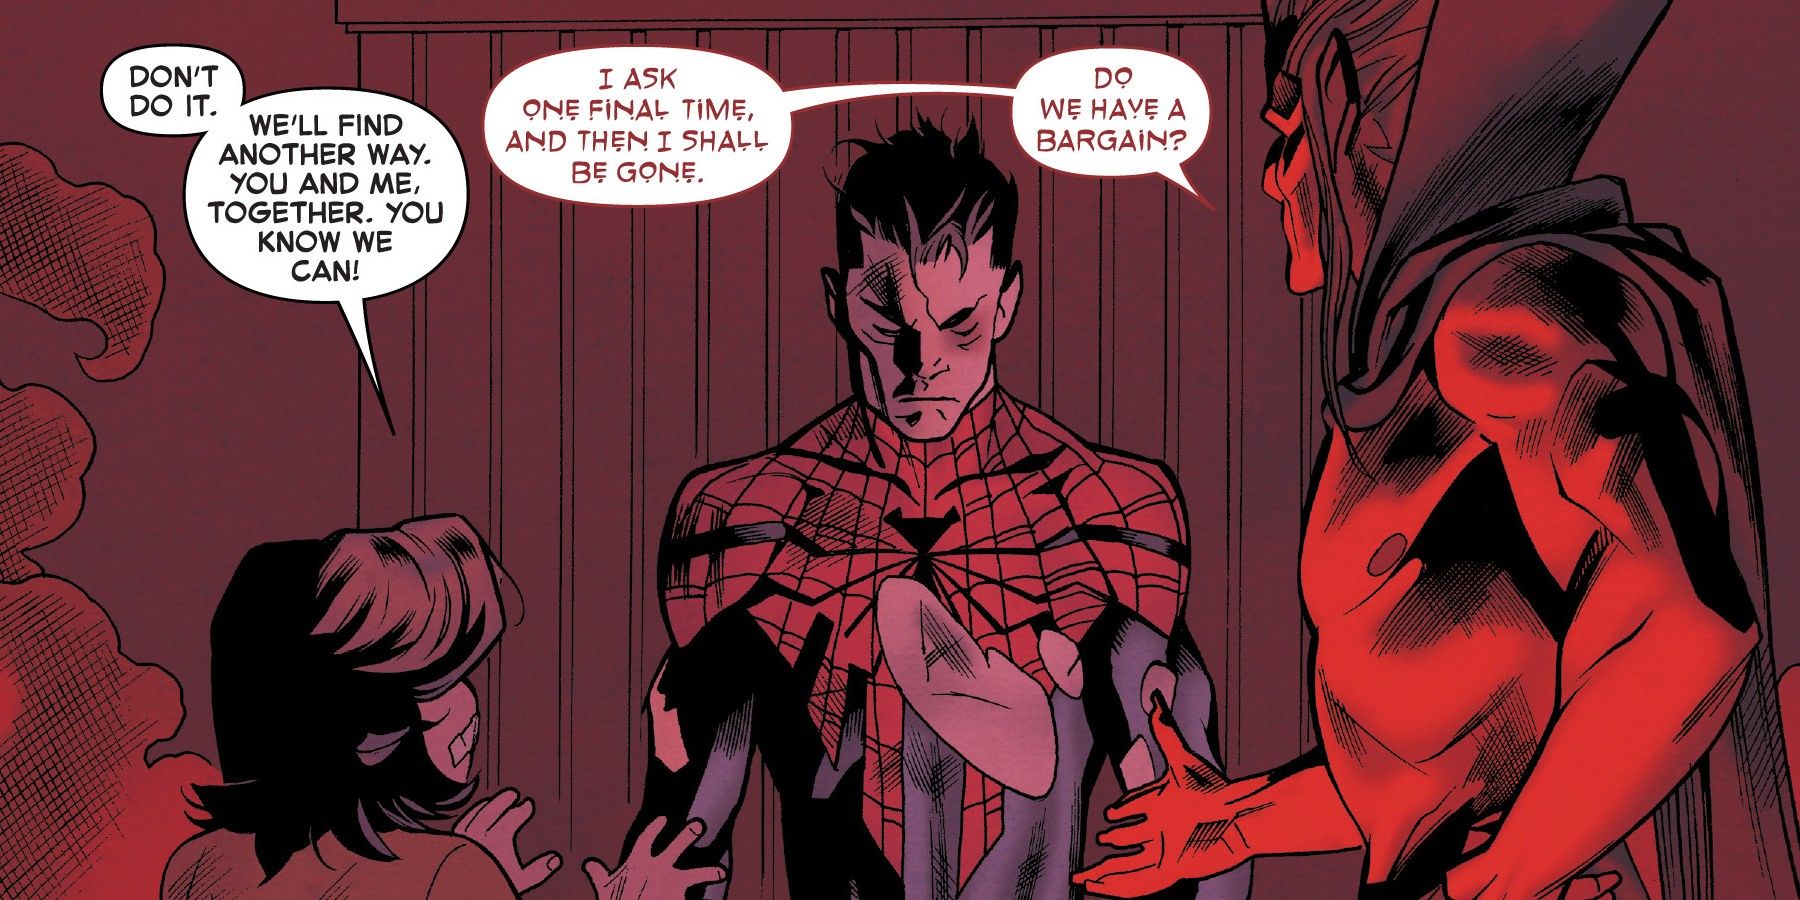 Otto Octavius Making a Deal With Mephisto at Anna Maria Marconi's Protest in 2019's Superior Spider-Man #11